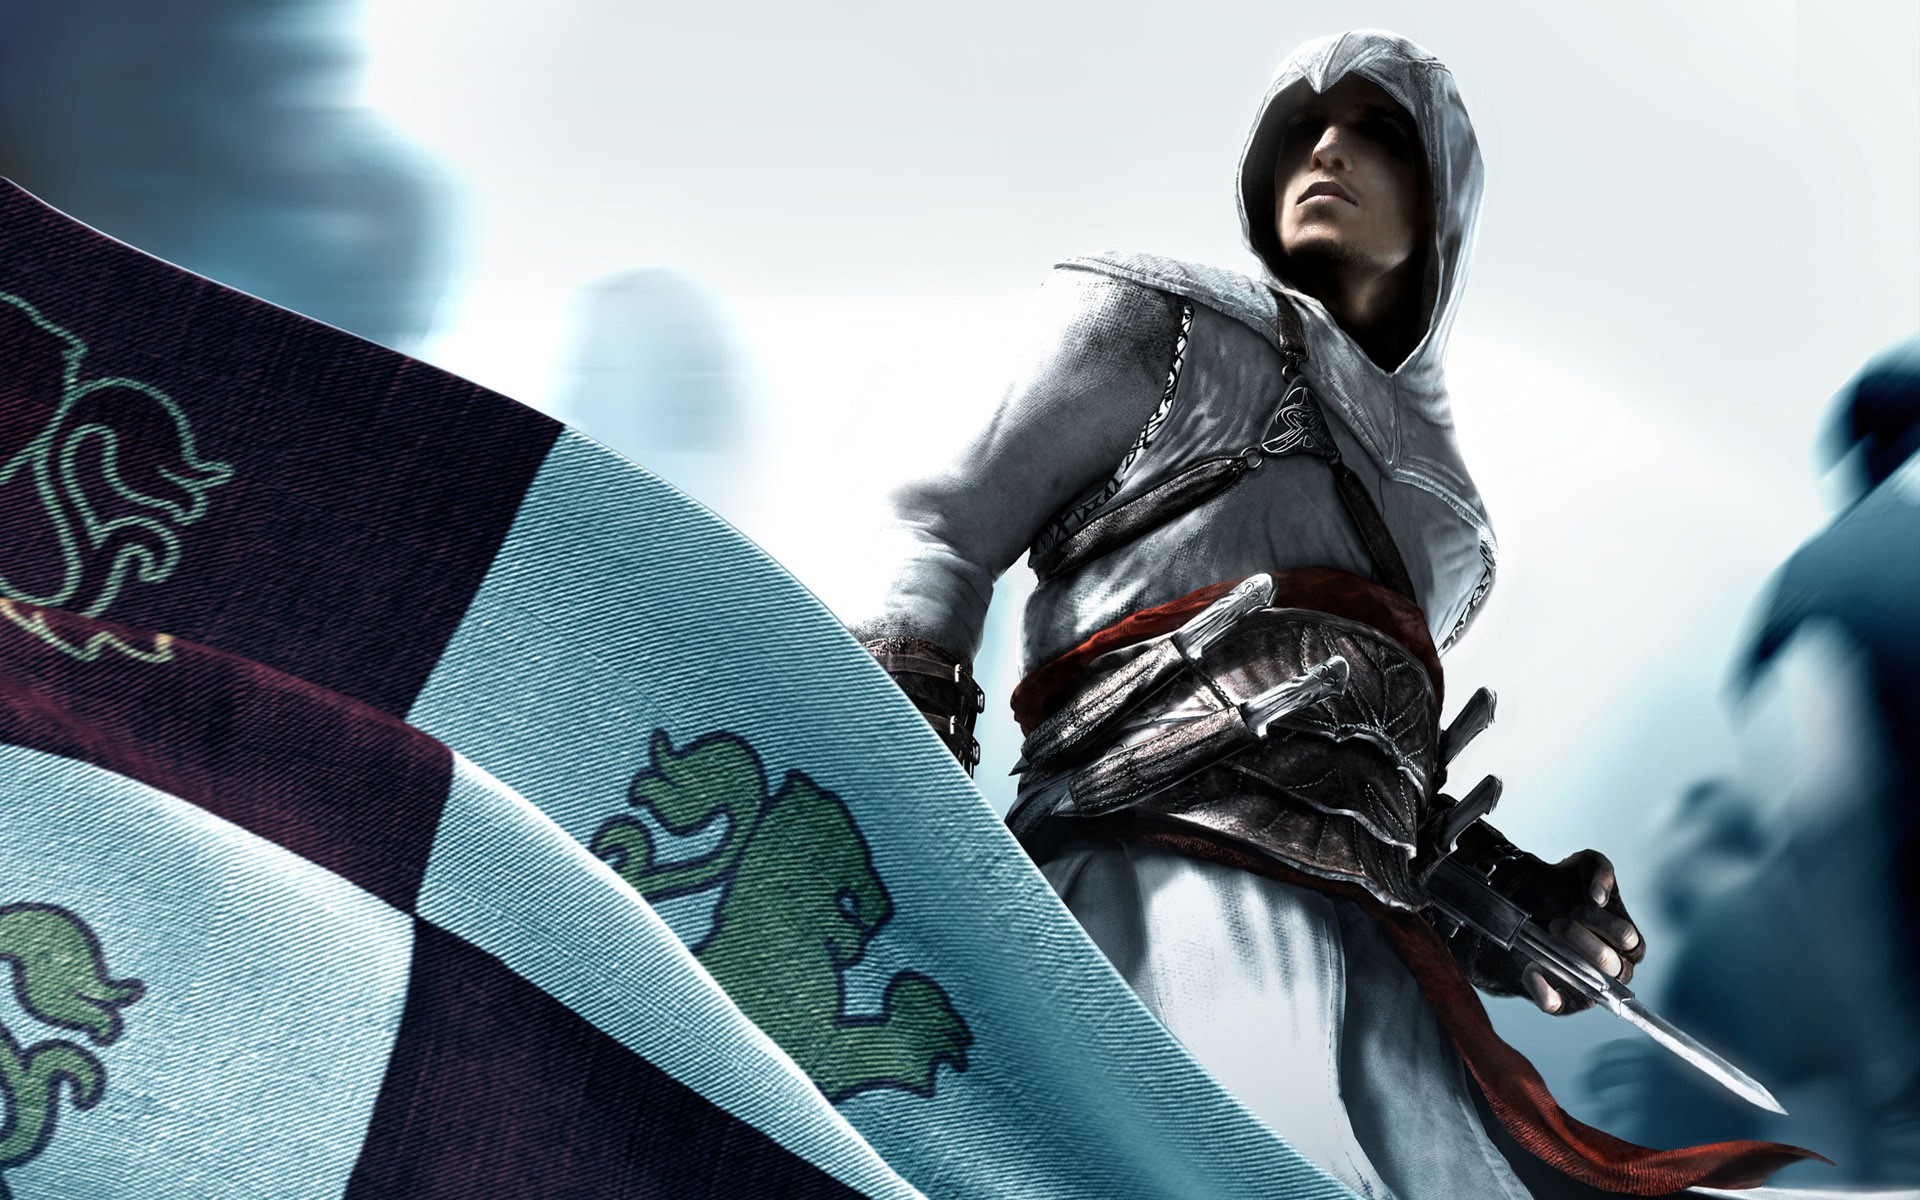 Assassin's Creed HD game wallpaper #7 - 1920x1200